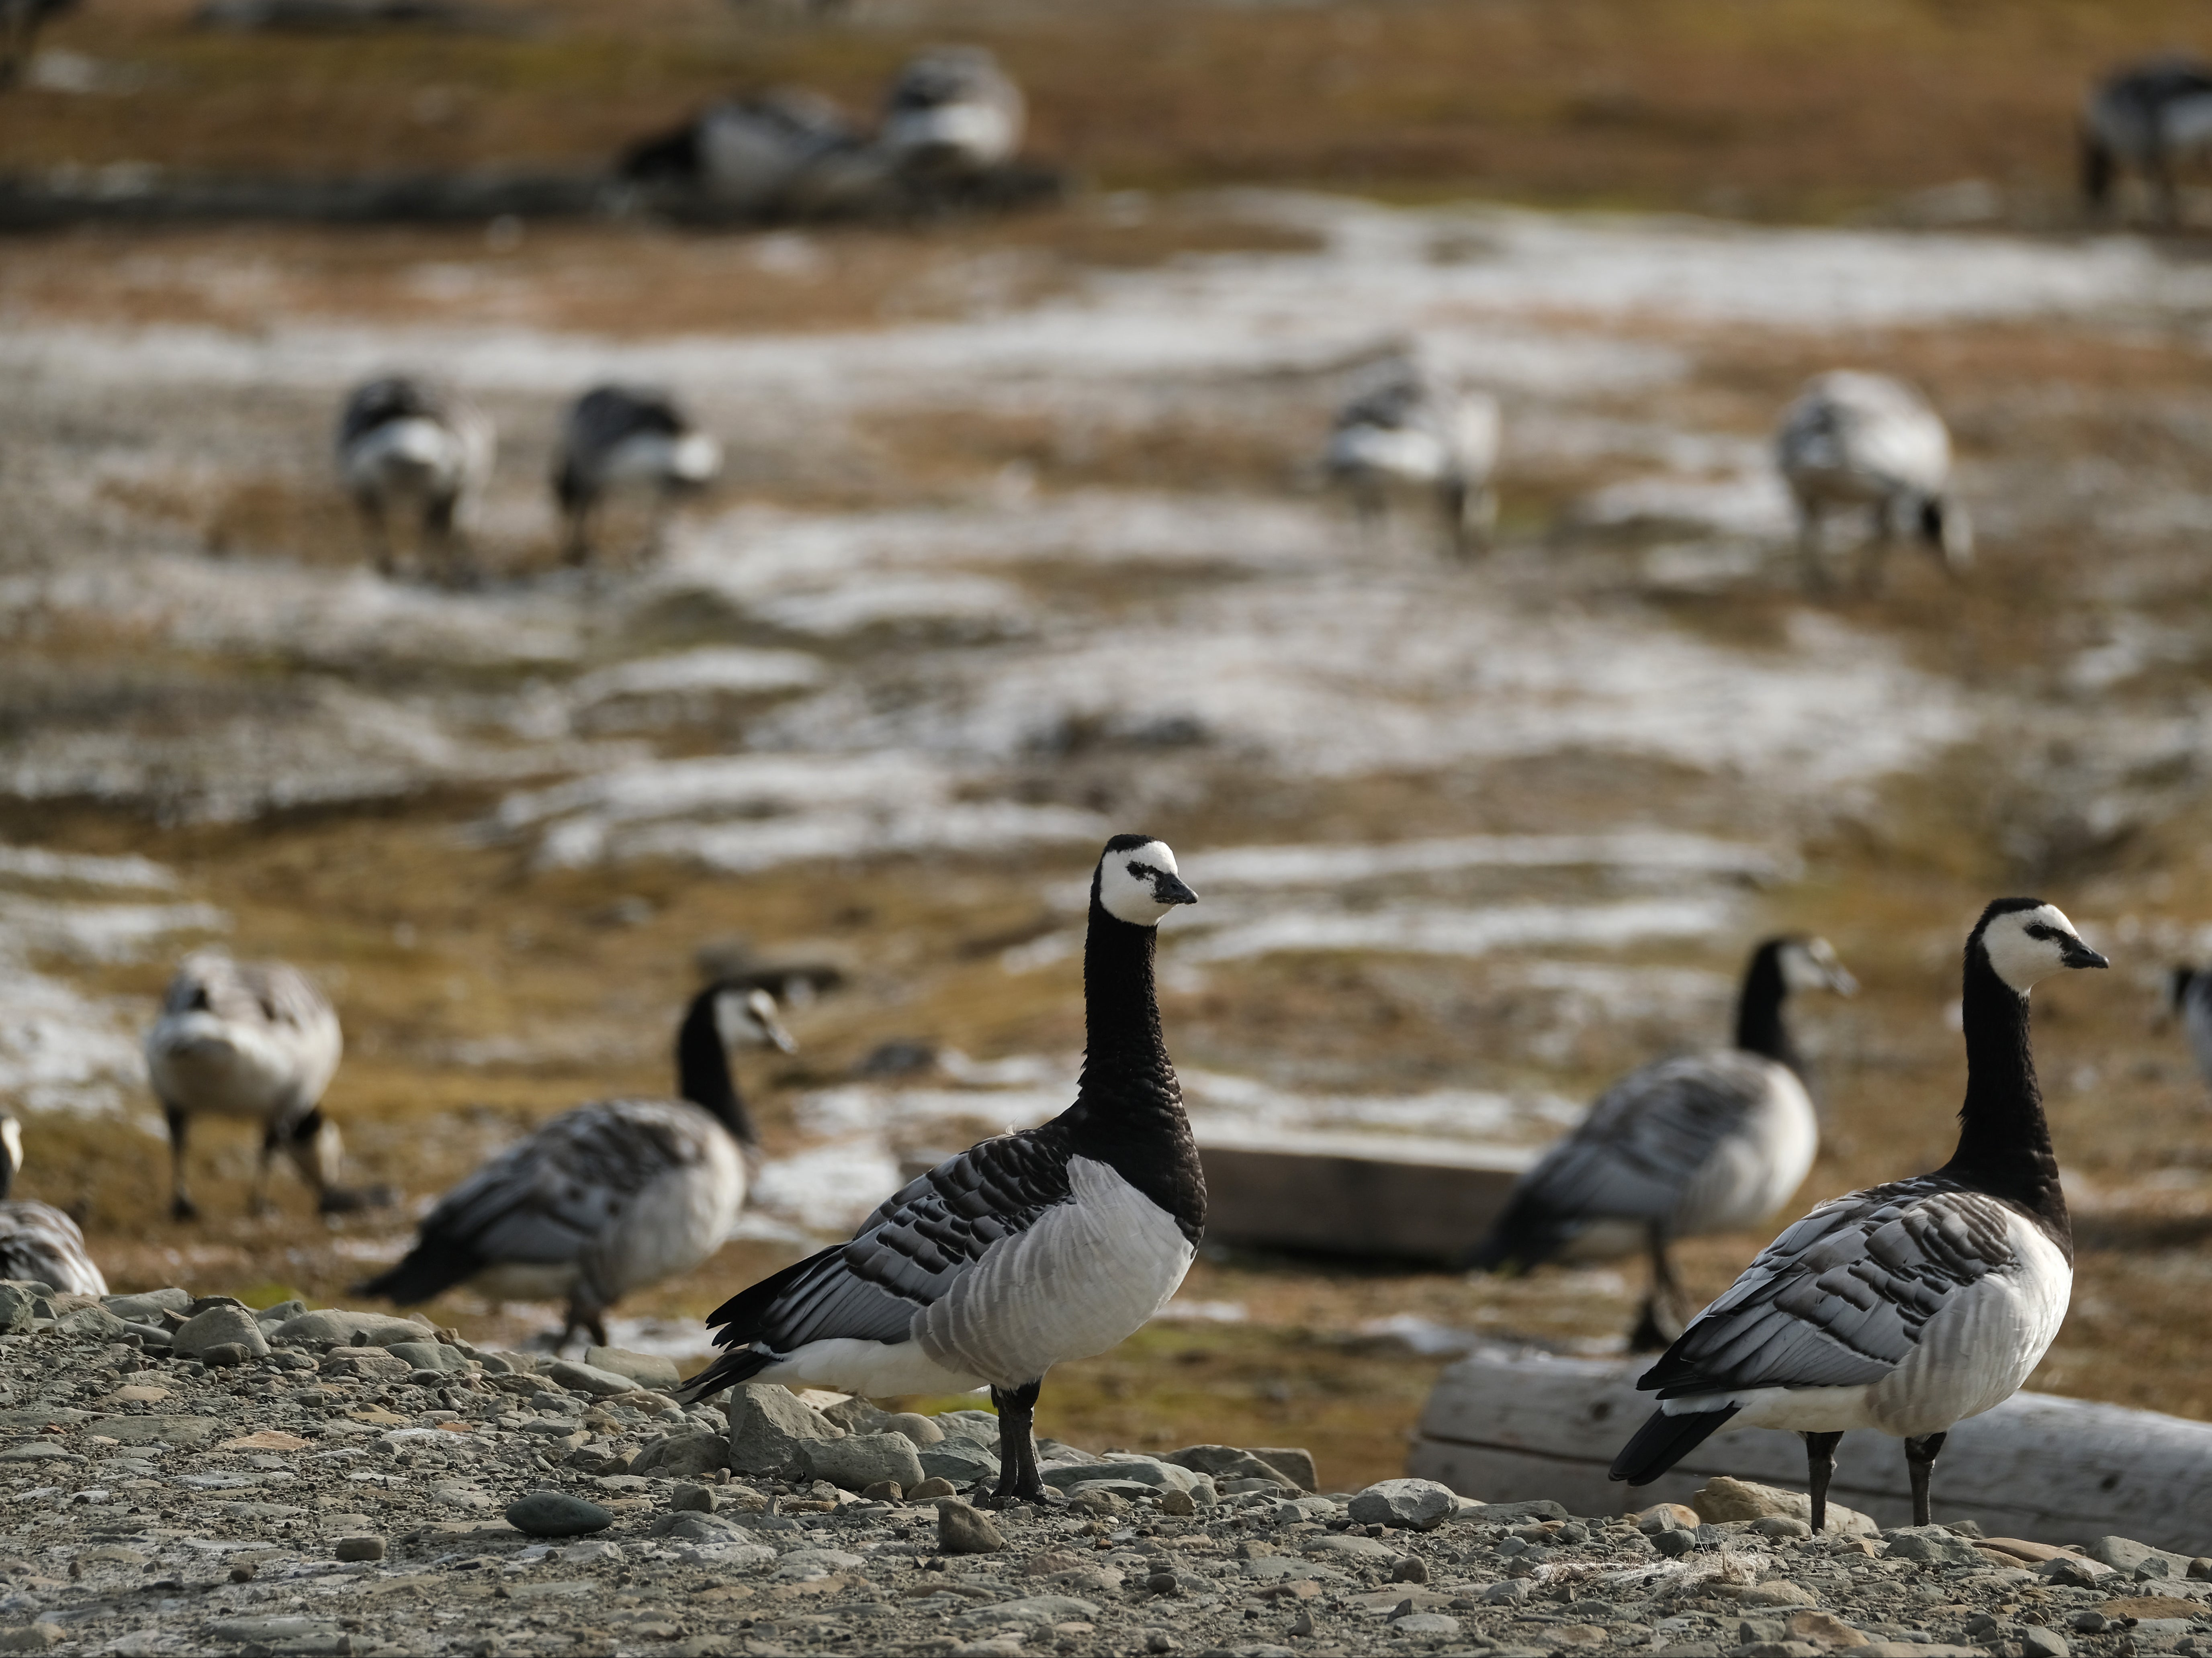 Some 4,000 barnacle geese of the rare Svalbard population have died close to the border between England and Scotland